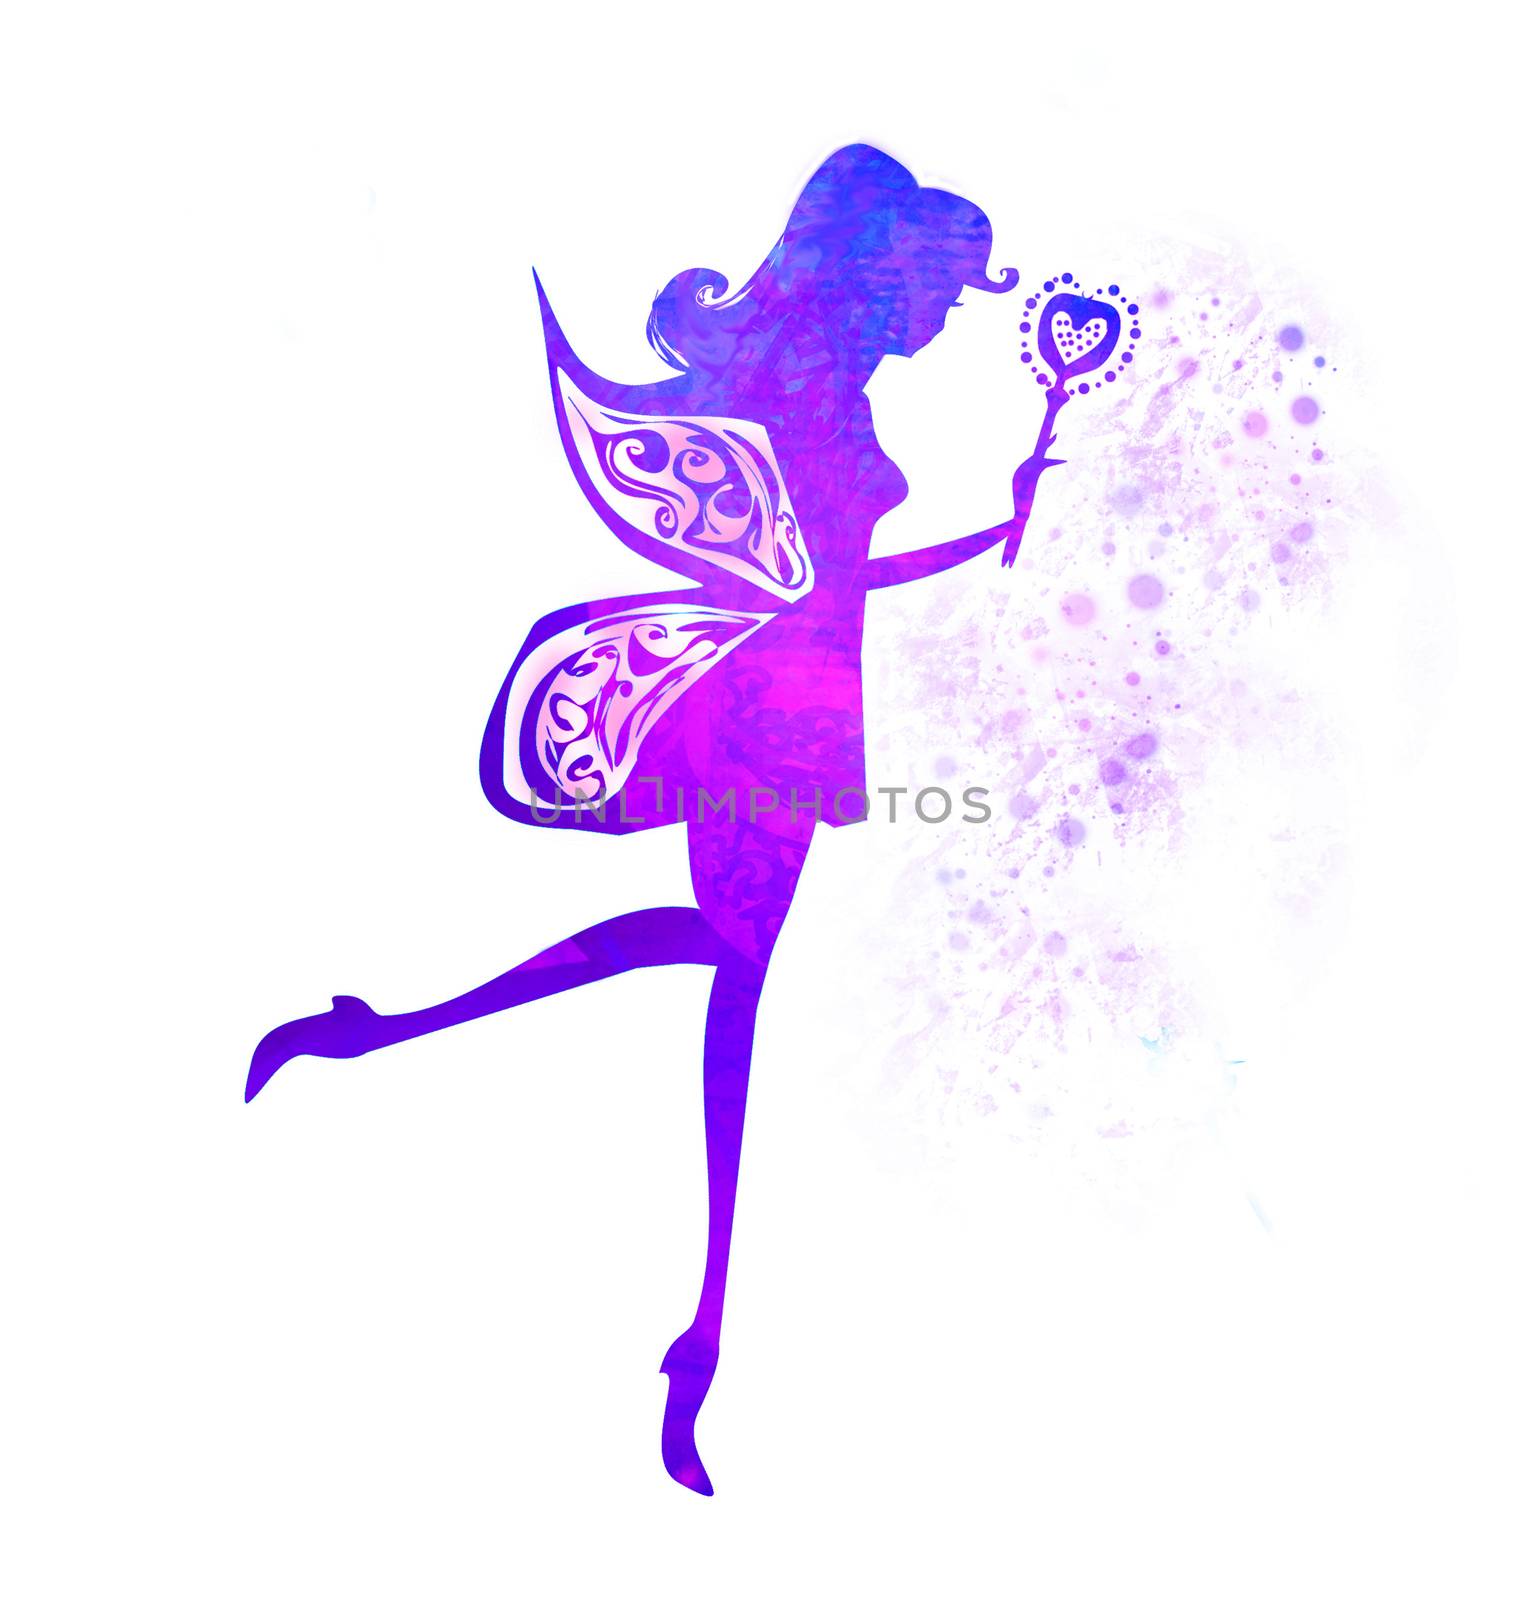 flying fairy with magic wand - isolated illustration, colorful s by JackyBrown